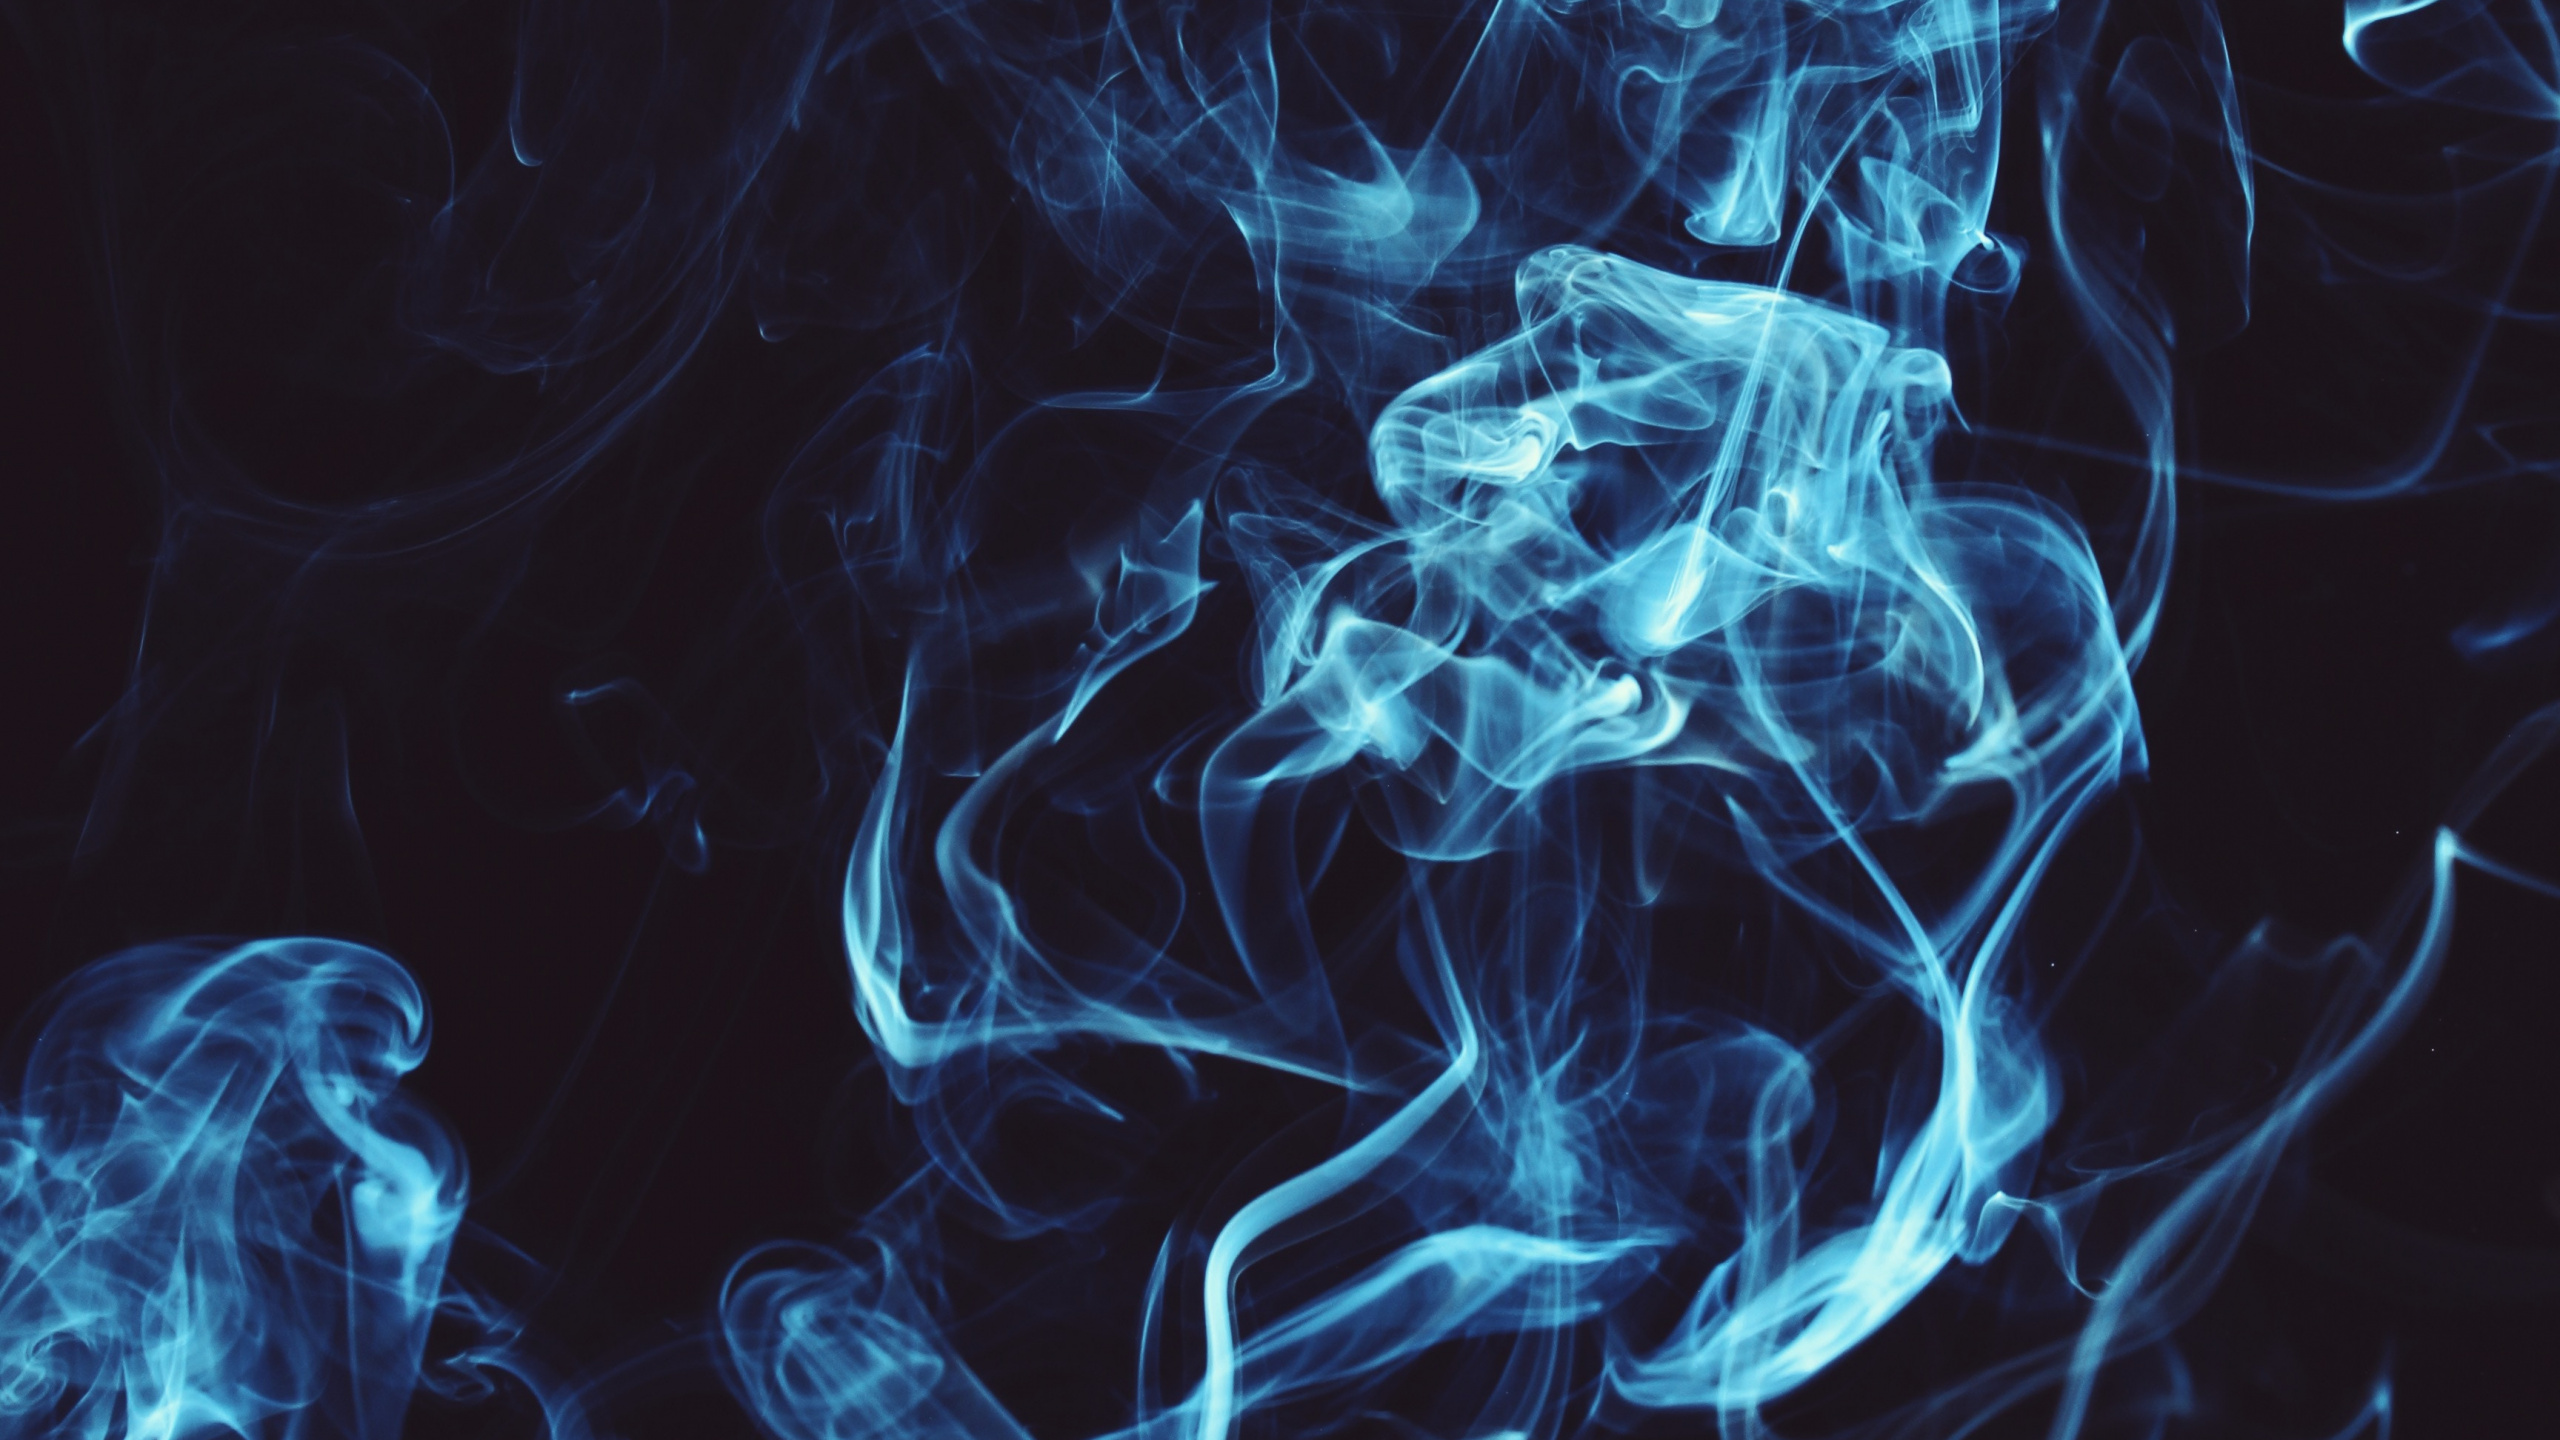 Blue and White Smoke Illustration. Wallpaper in 2560x1440 Resolution